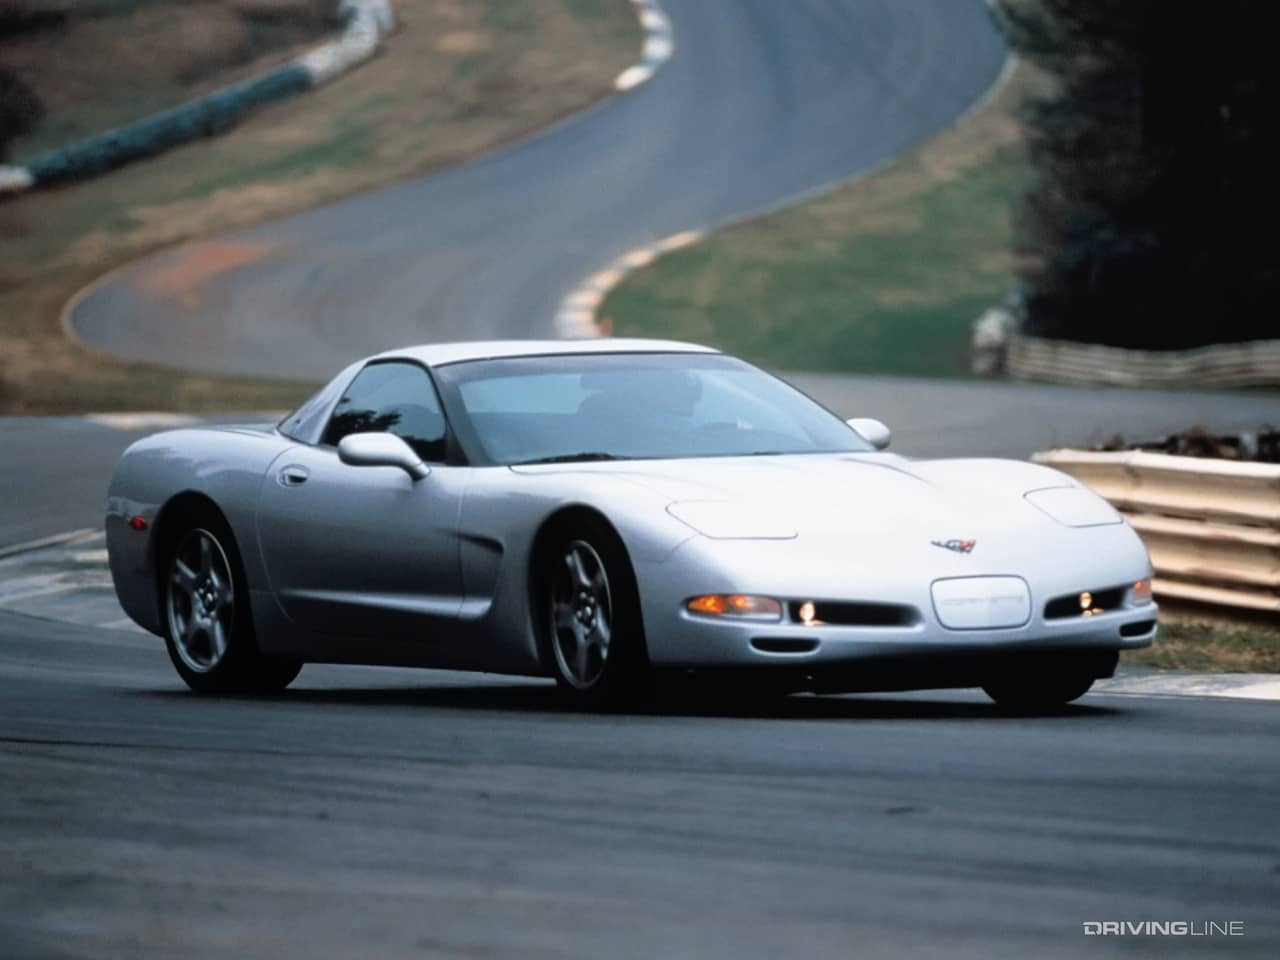 Secrets Of The 1997 2004 C5 Chevrolet Corvette Chassis Revealed Why It